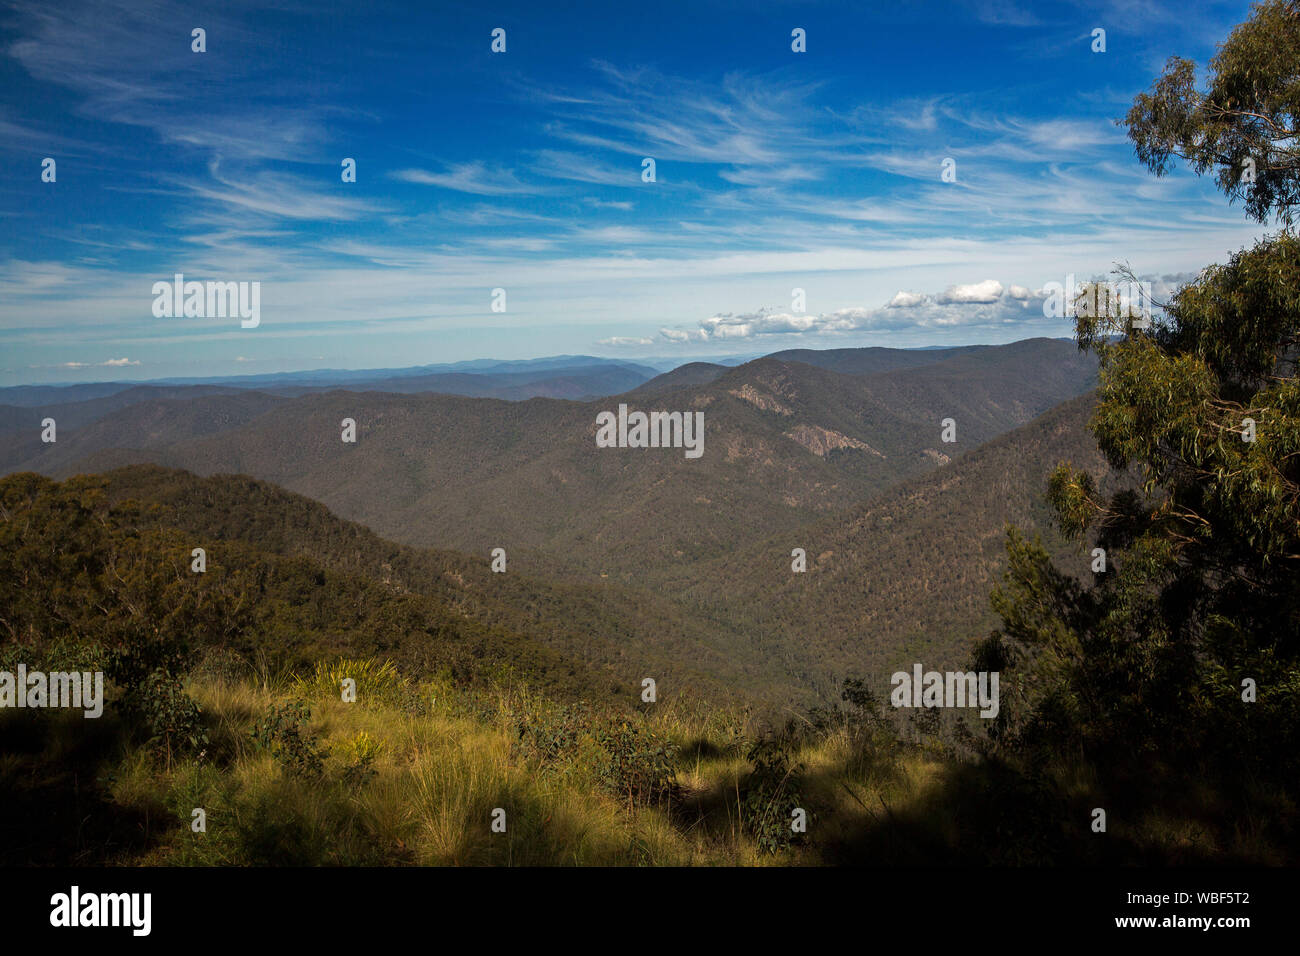 Landscape dominated by rugged forested peaks of Great Dividing Range that stretch to distant horizon under blue sky, NSW Australia Stock Photo